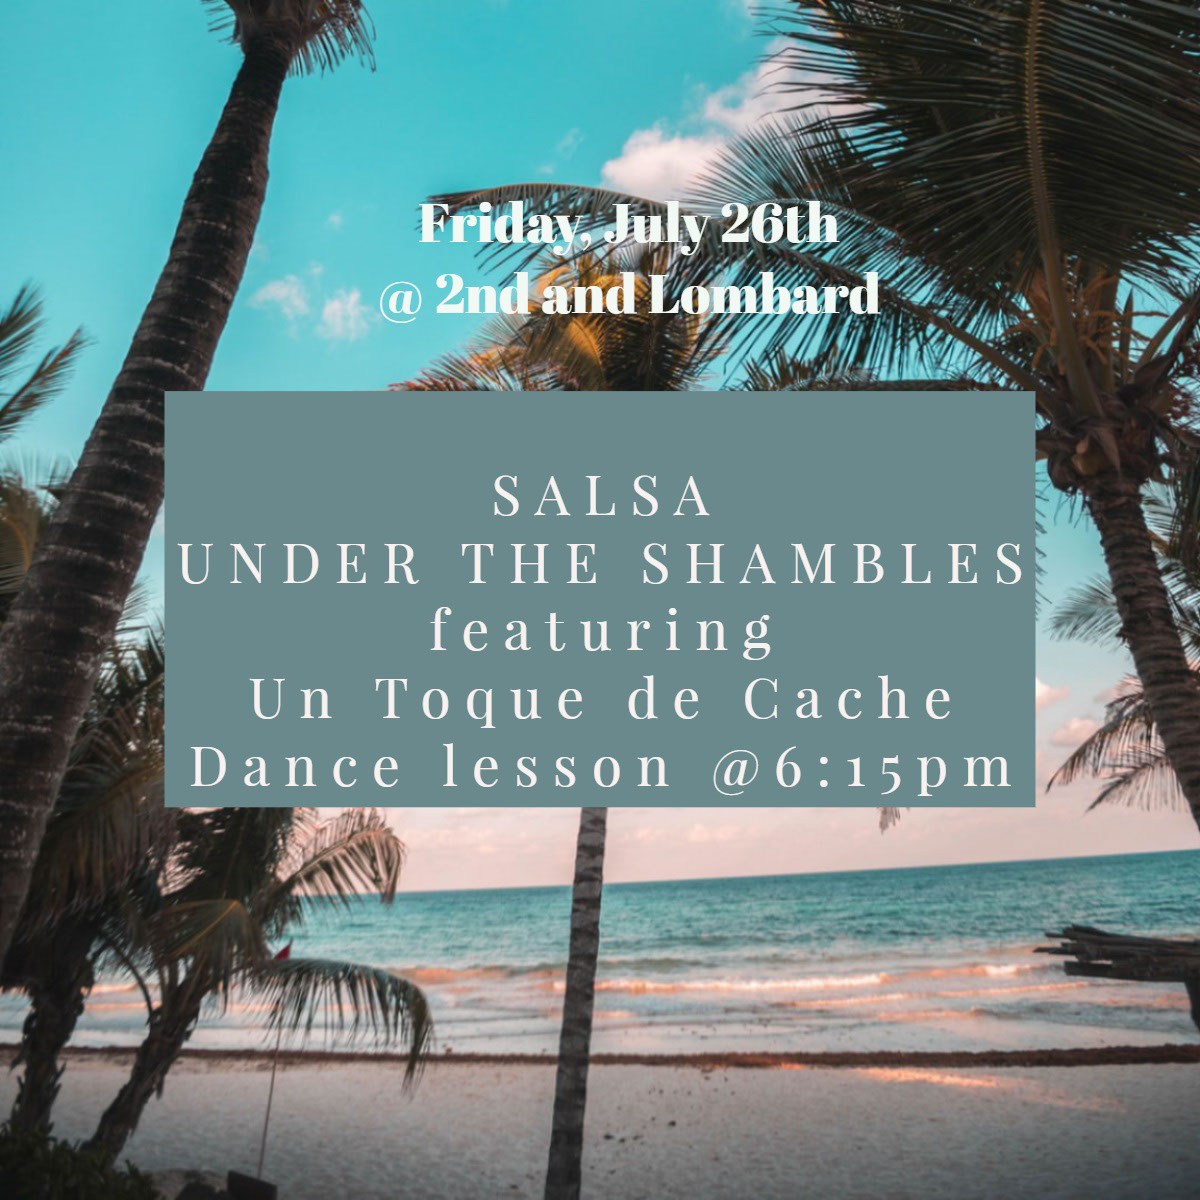 <BR><BR>              SALSAUNDER THE SHAMBLES               featuring    Un Toque de Cache   Dance lesson @6:15pm  <BR><BR>              SALSA
UNDER THE SHAMBLES  
             featuring
    Un Toque de Cache
   Dance lesson @6:15pm <P>     Friday, July 26th <BR>@ 2nd and Lombard